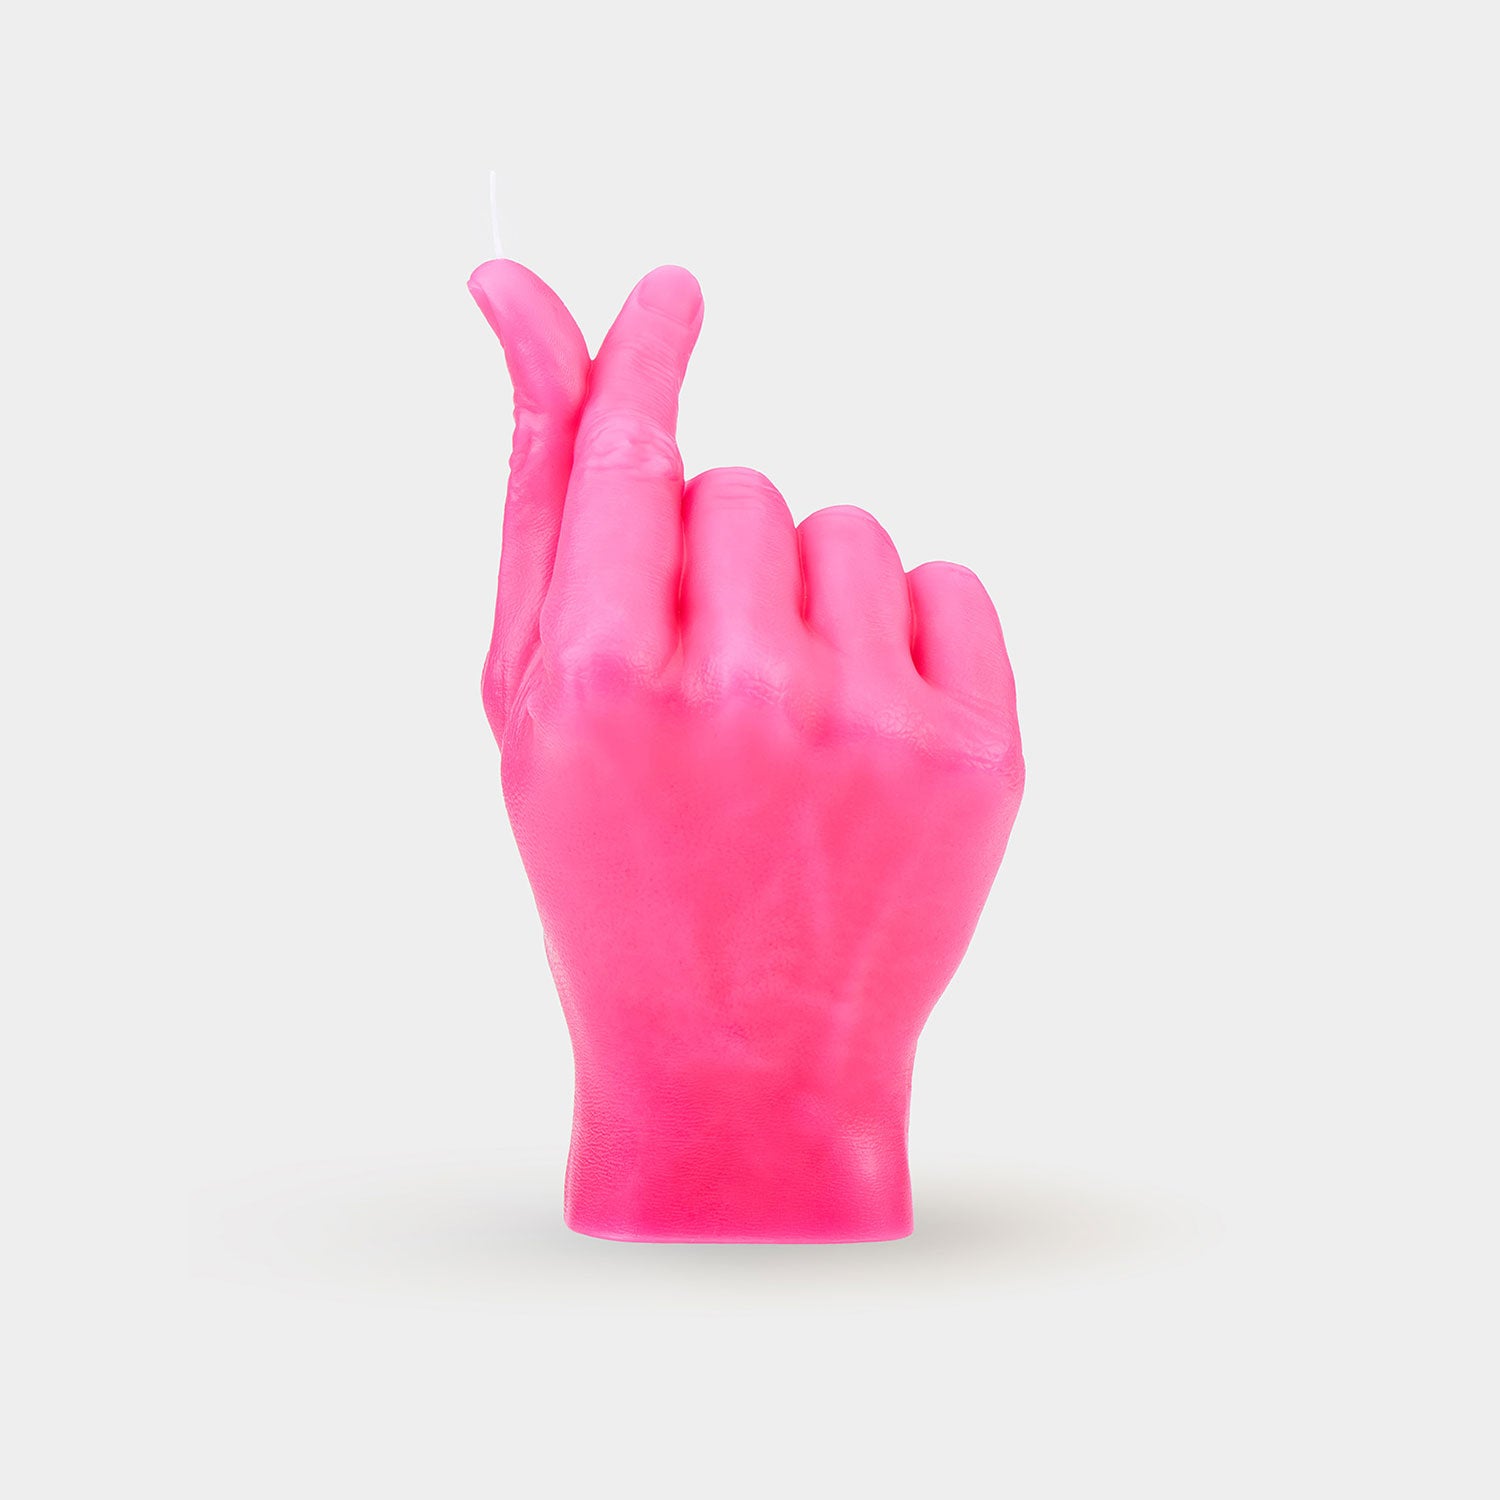 CandleHand "Finger Hearts" Candle - Pink